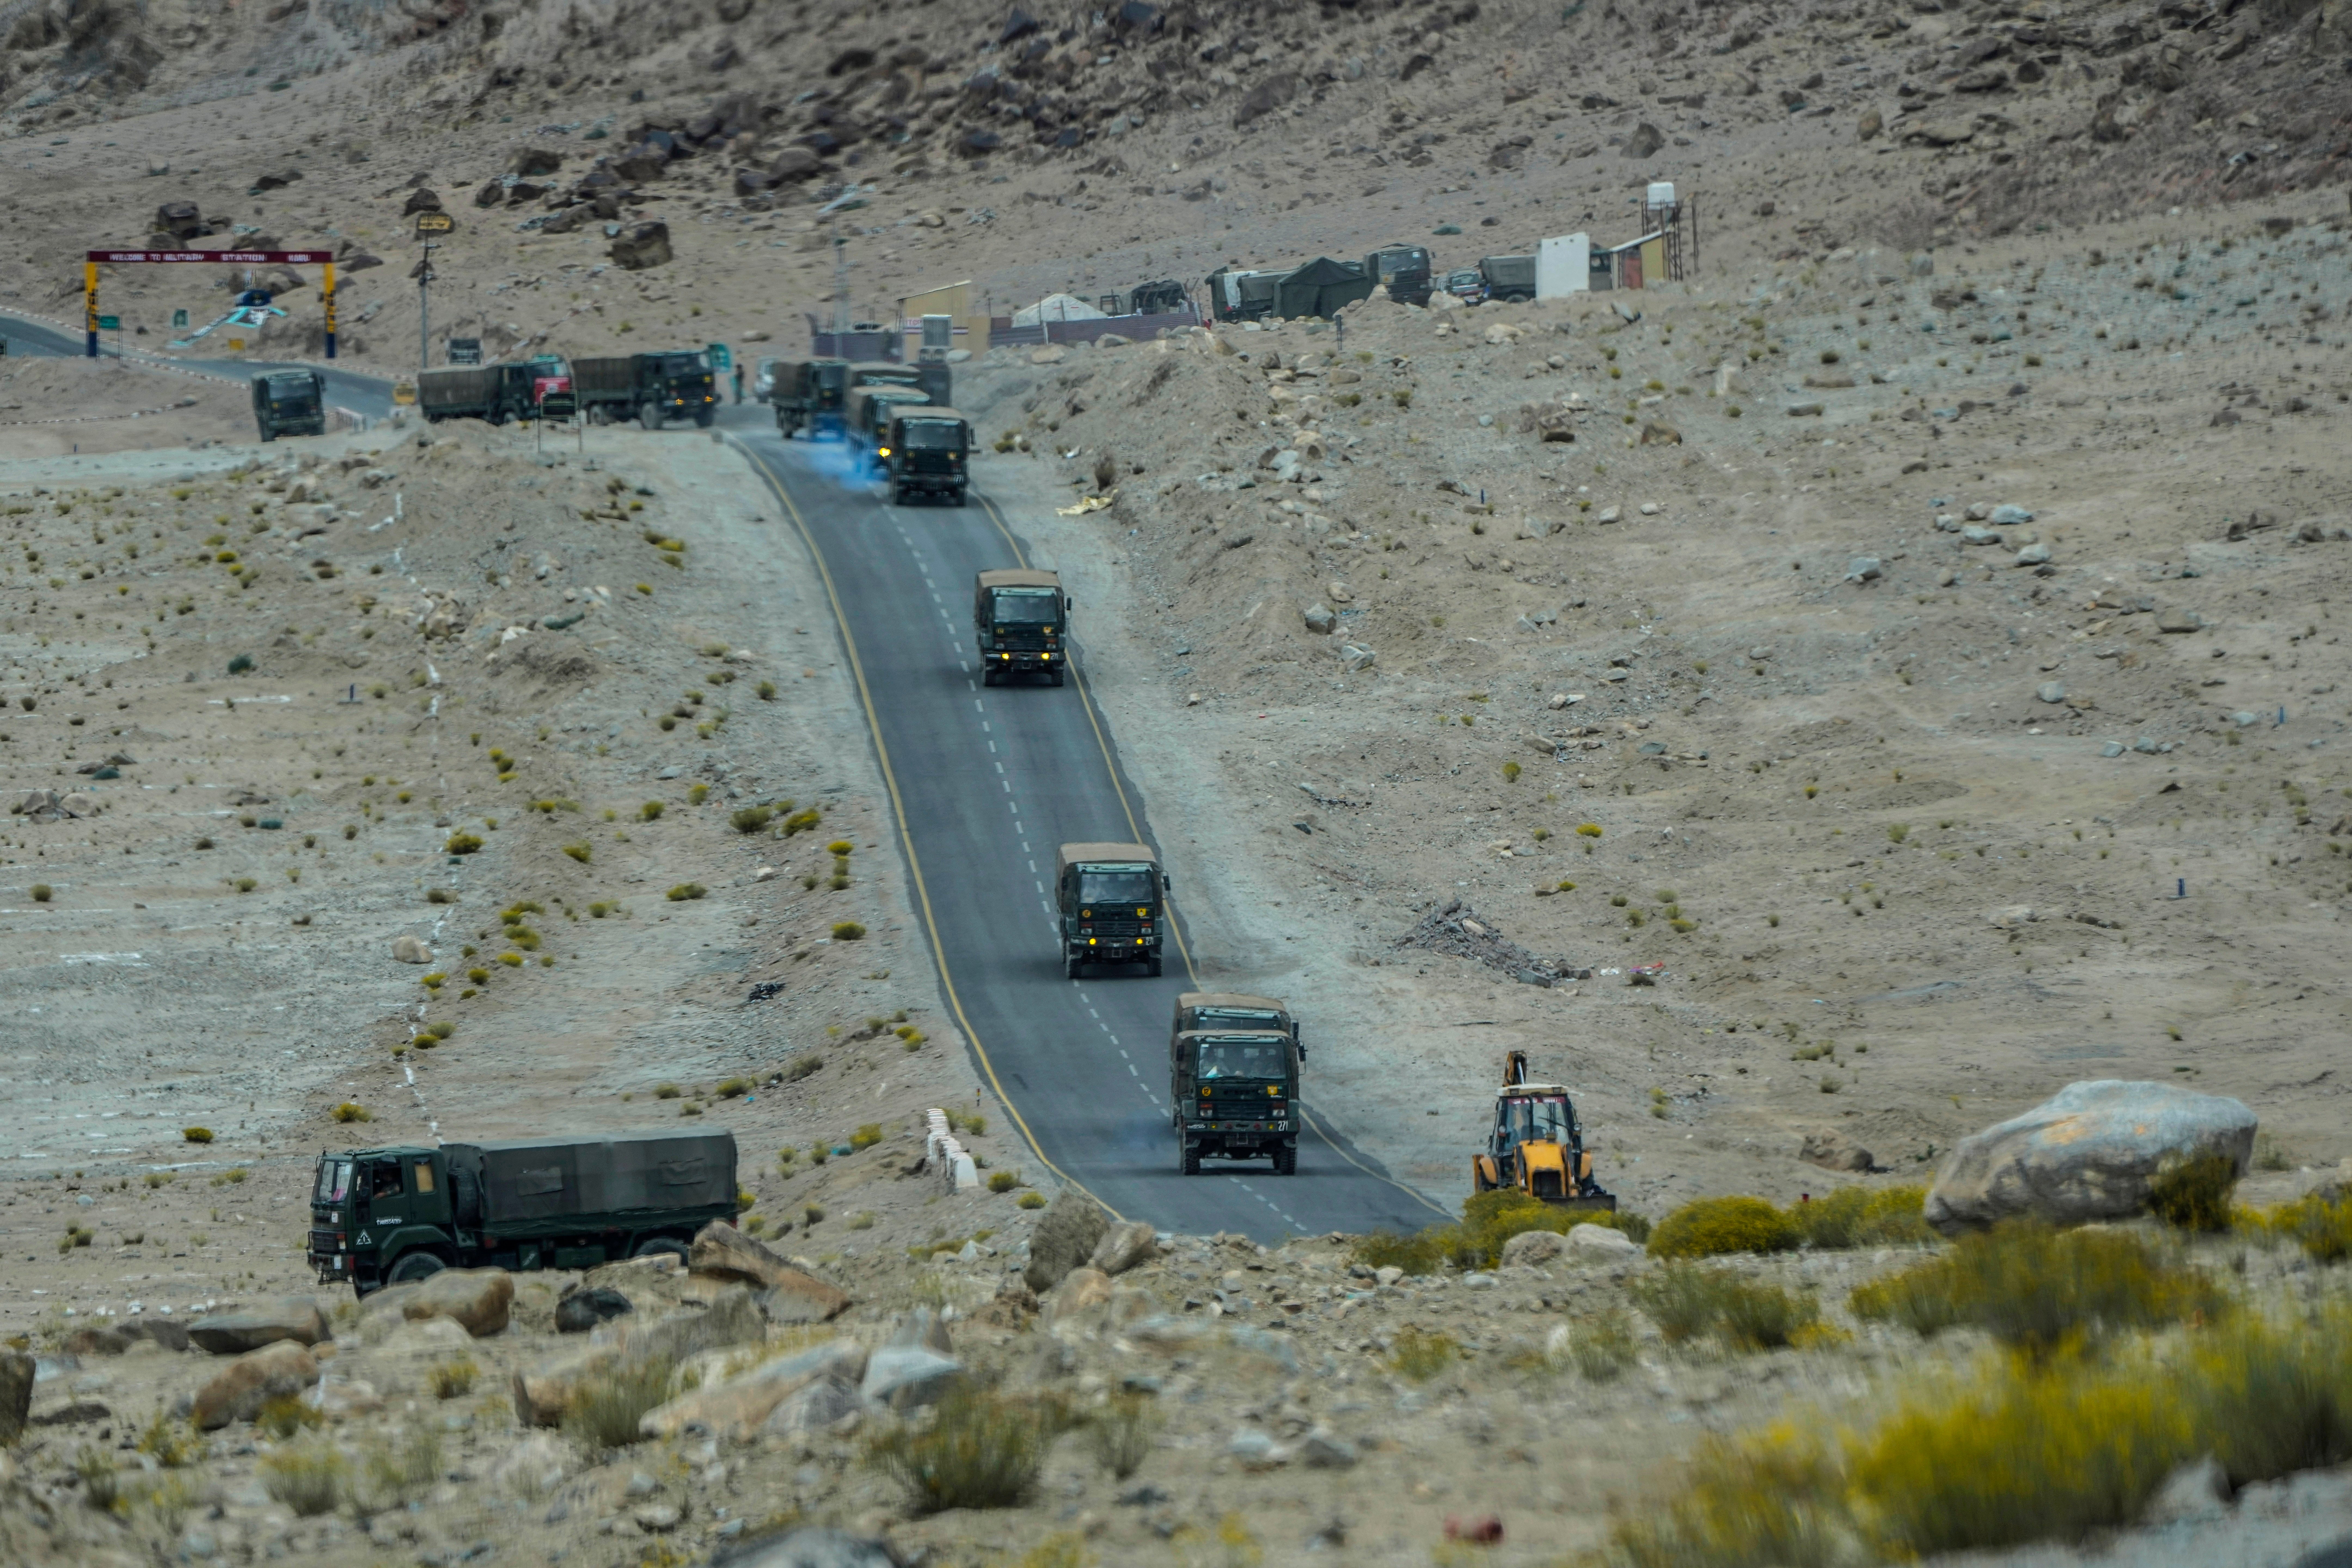 Indian army vehicles move in a convoy in the cold desert region of Ladakh, India in September